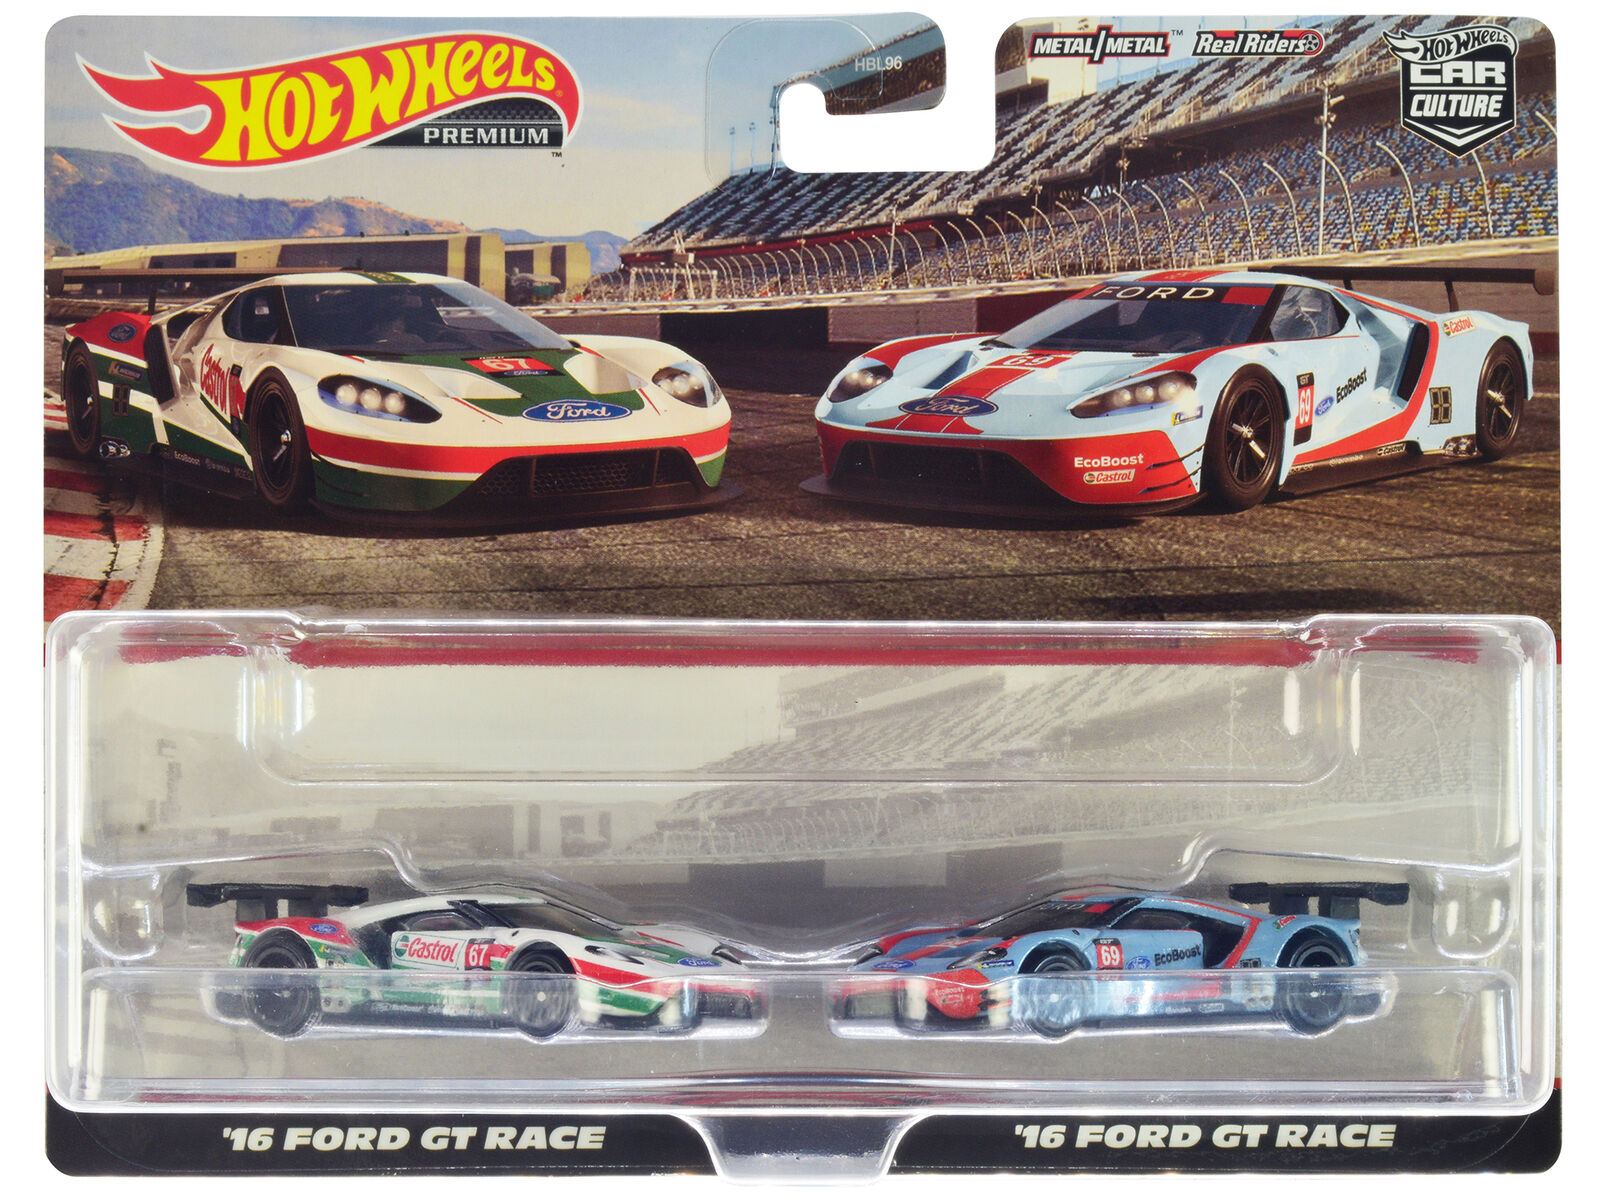 2016 Ford GT Race #67 White with Green and Red Stripes and 2016 Ford GT Race #69